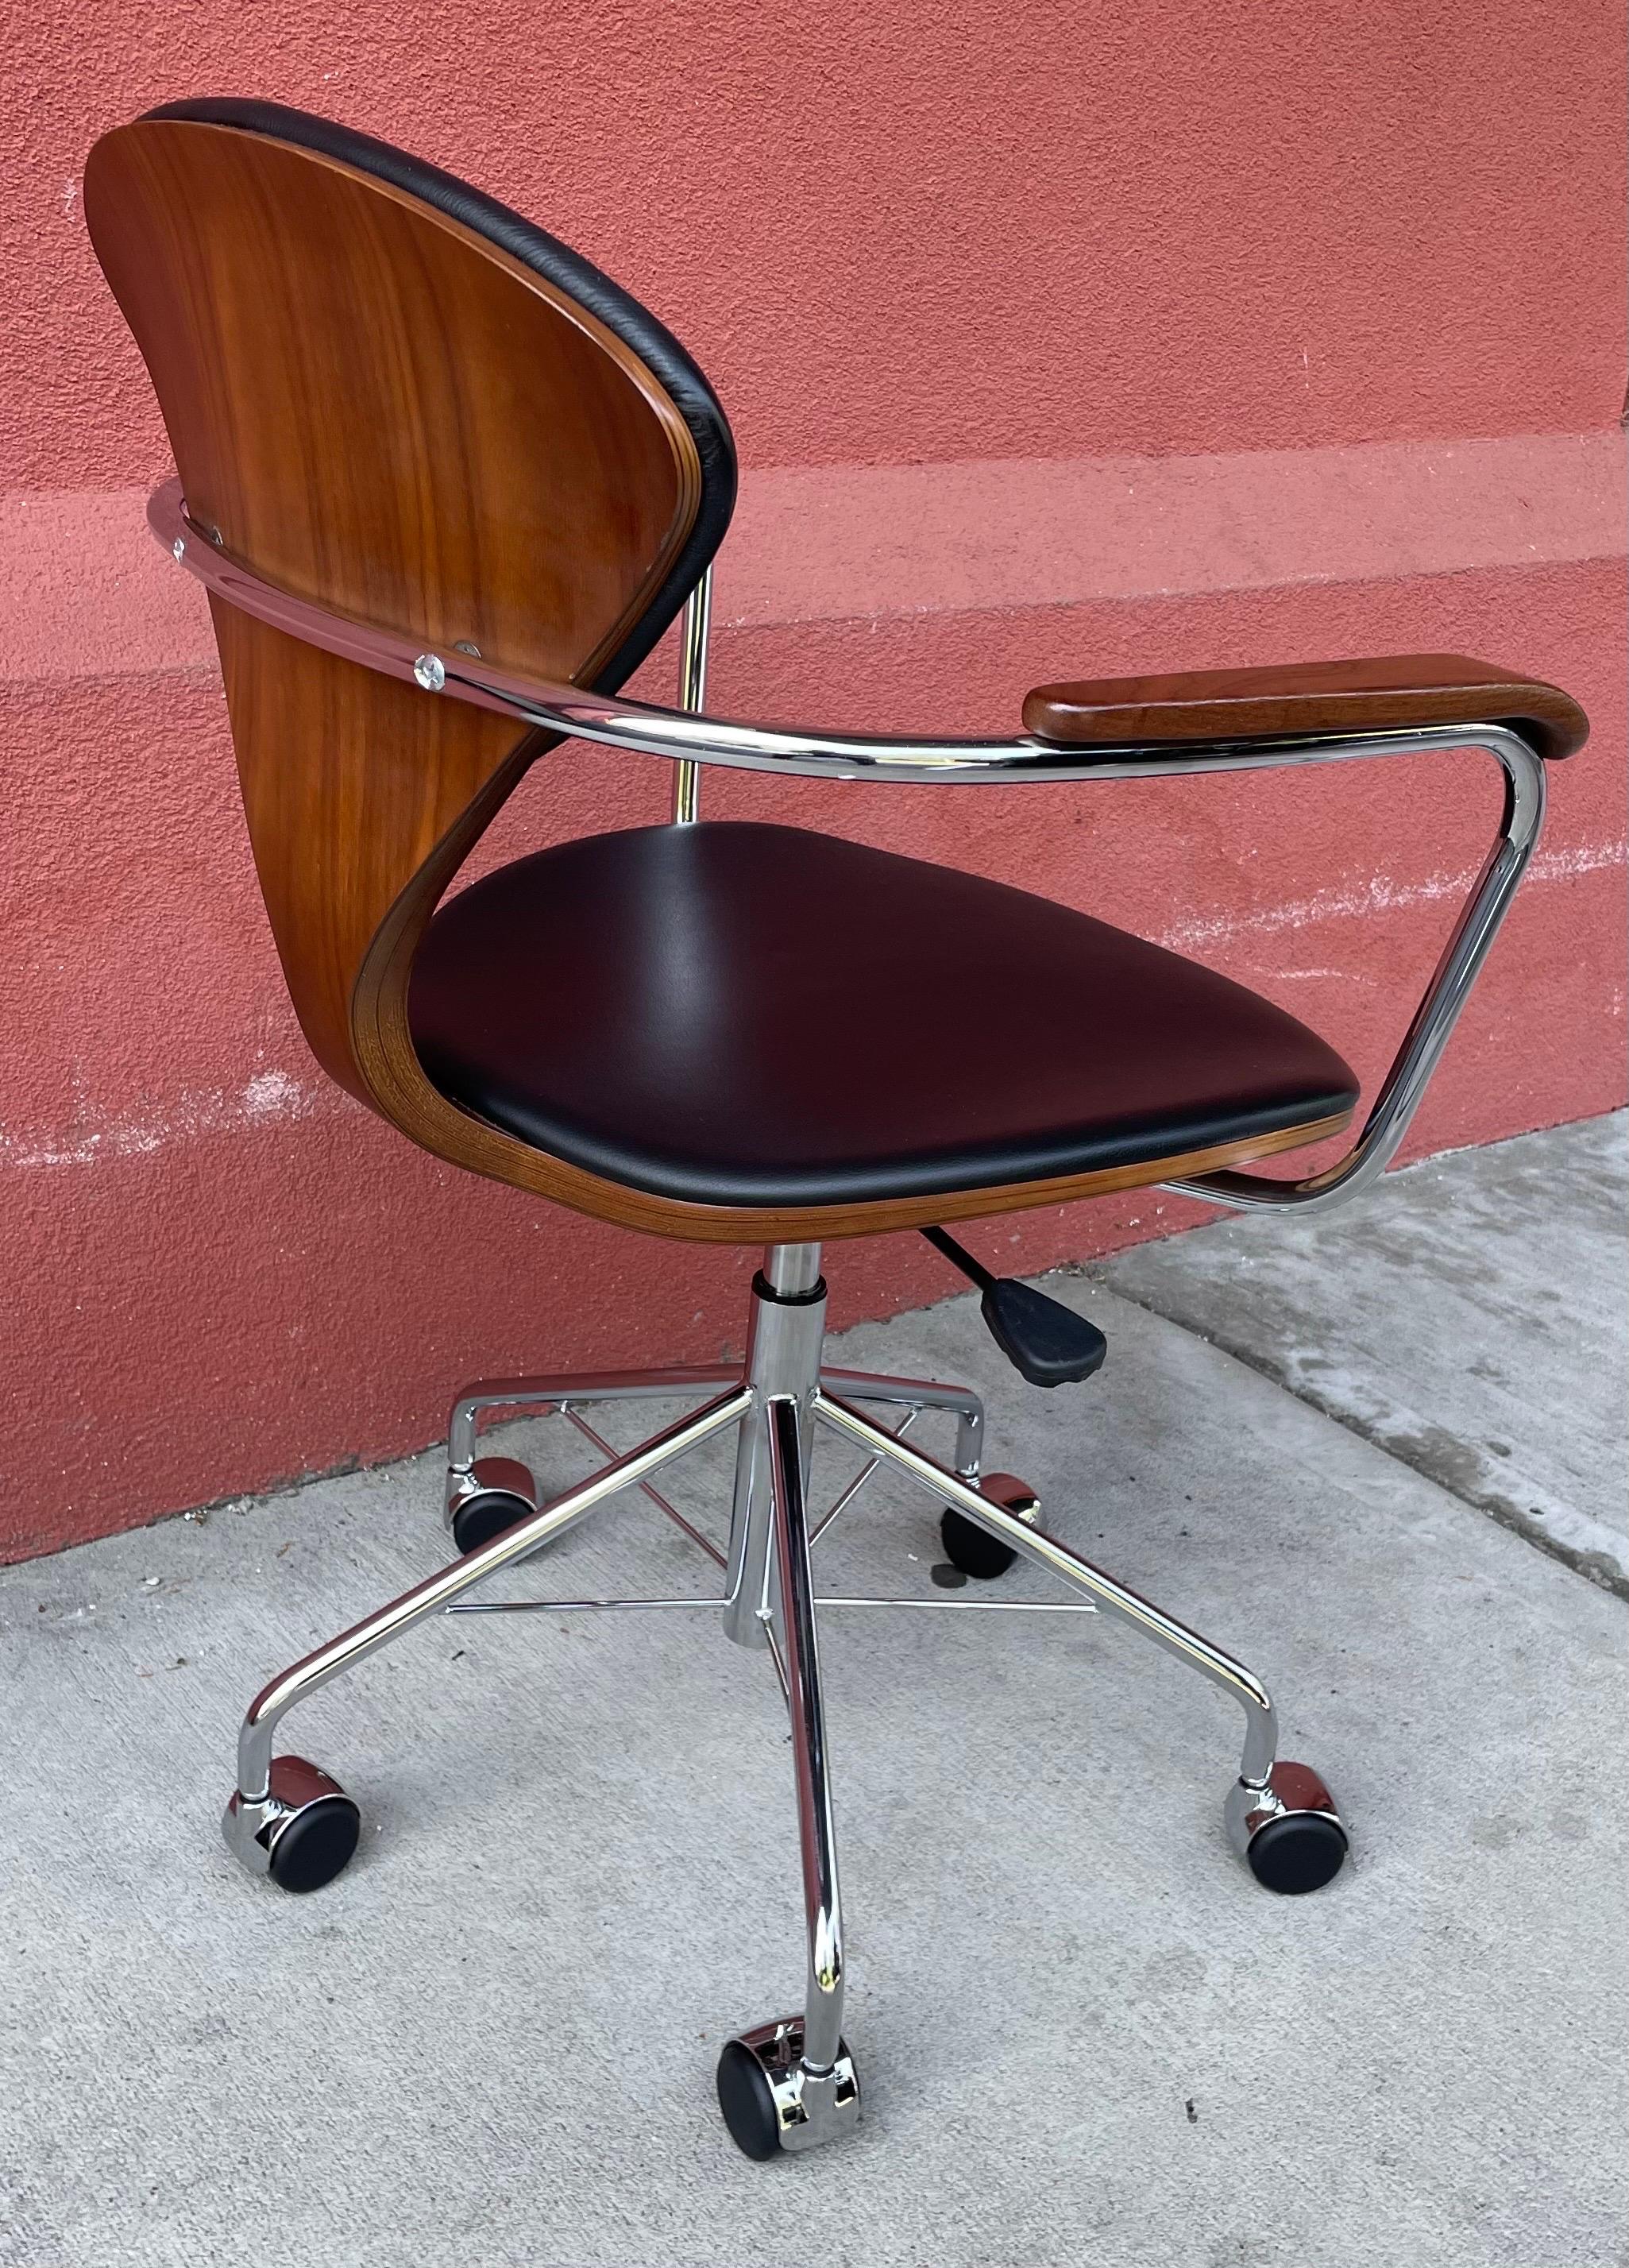 Beautiful Norman Cherner task chair in walnut with arm rests, chrome base, black leather seat and back rest.